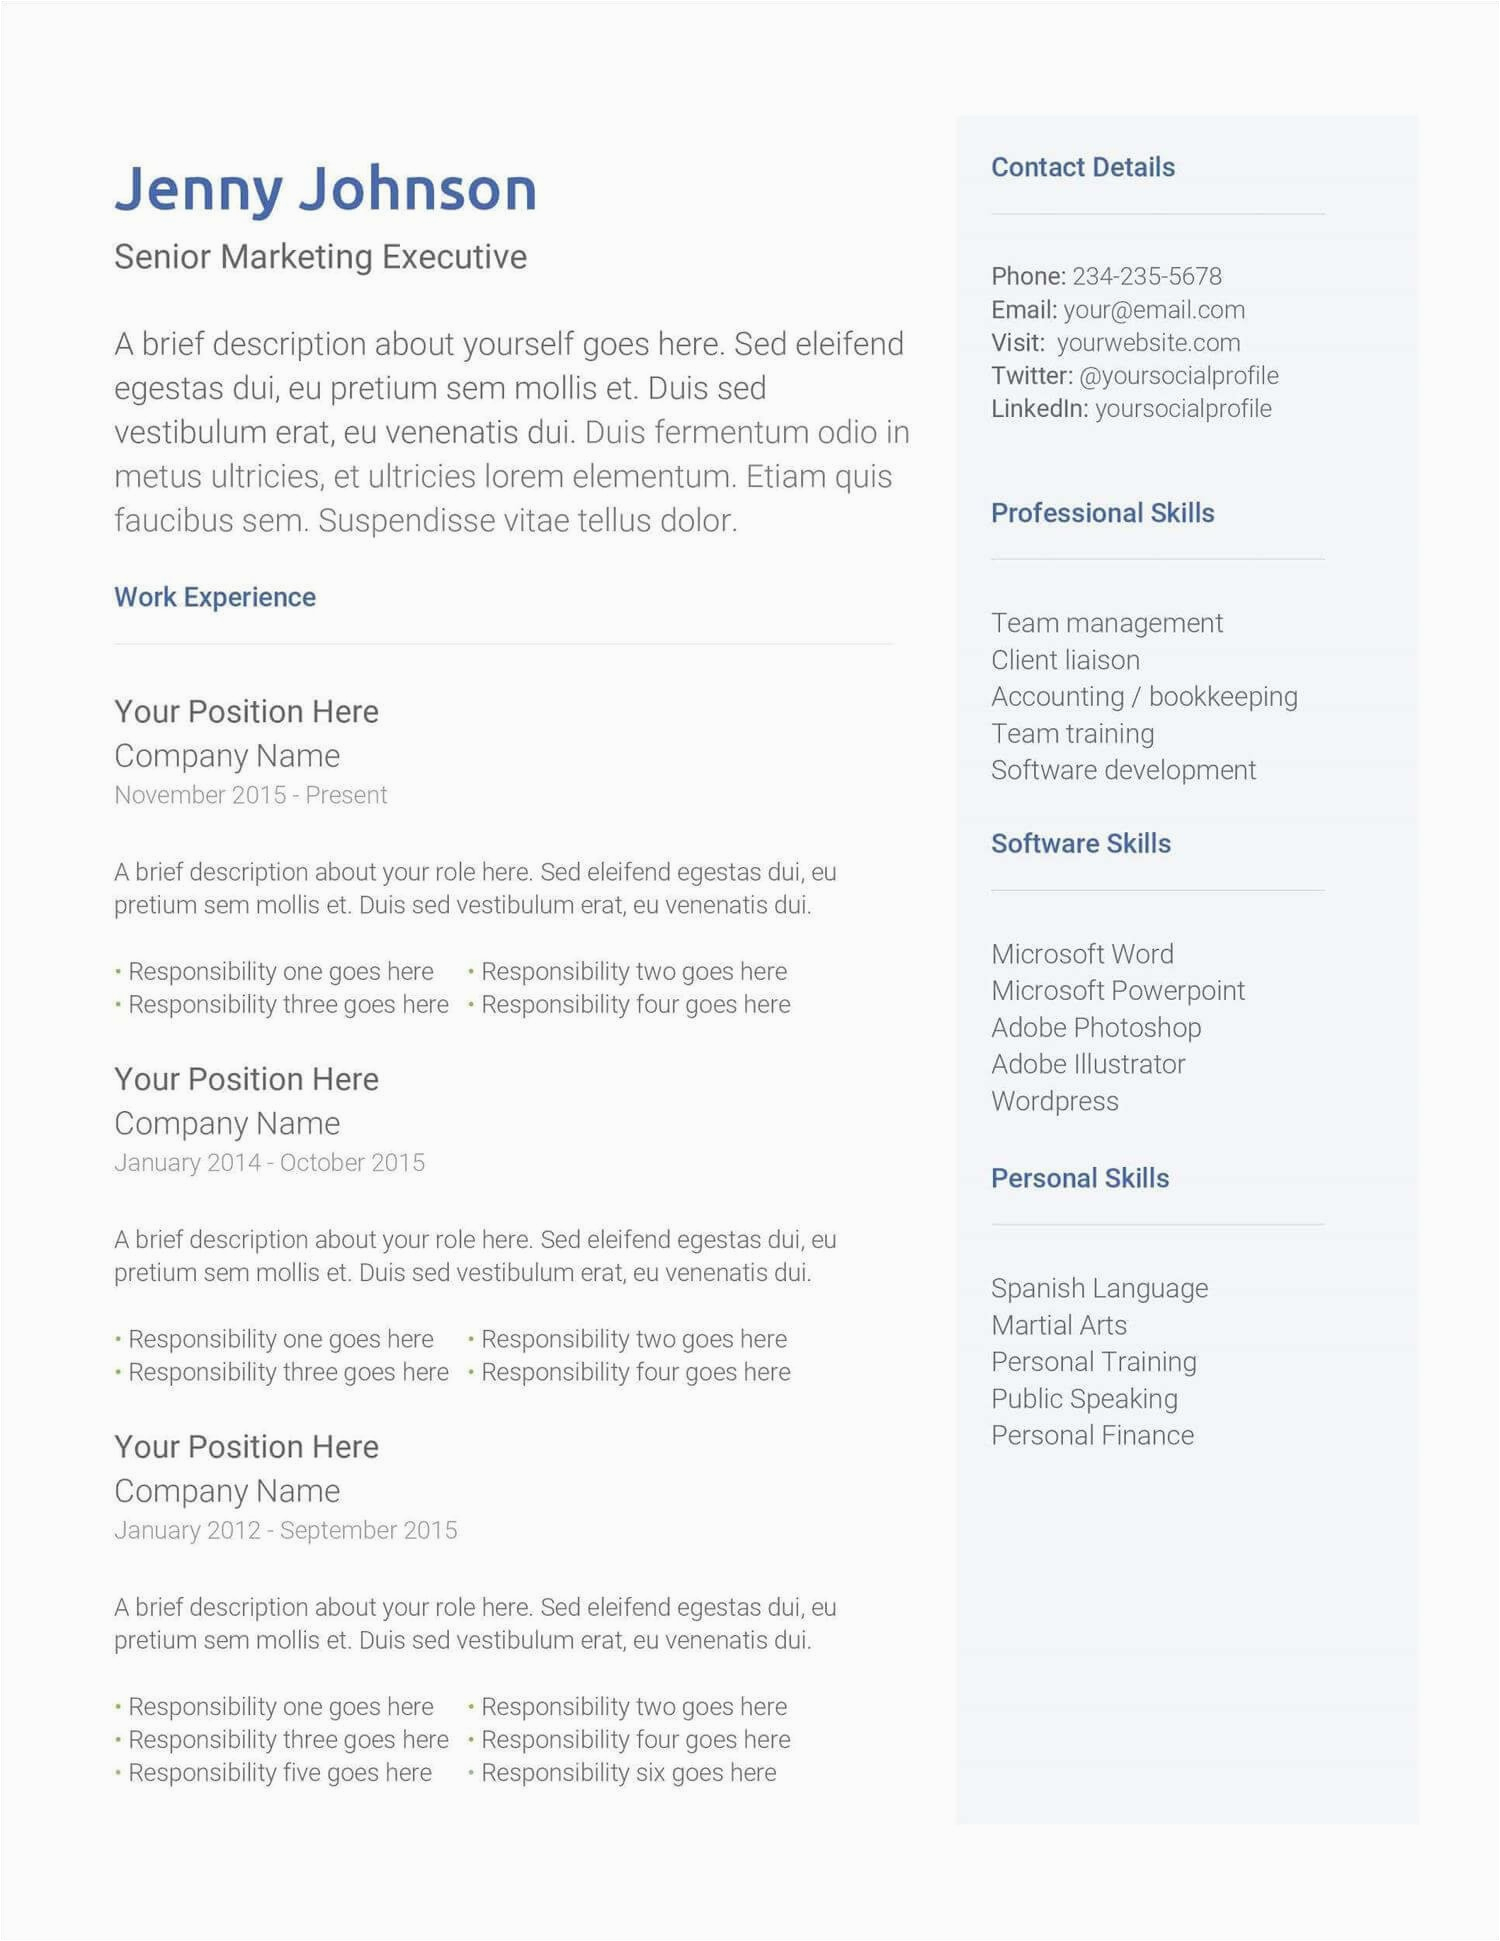 Resume Templates Free Download for Experienced Professionals Ready Made Resume Template